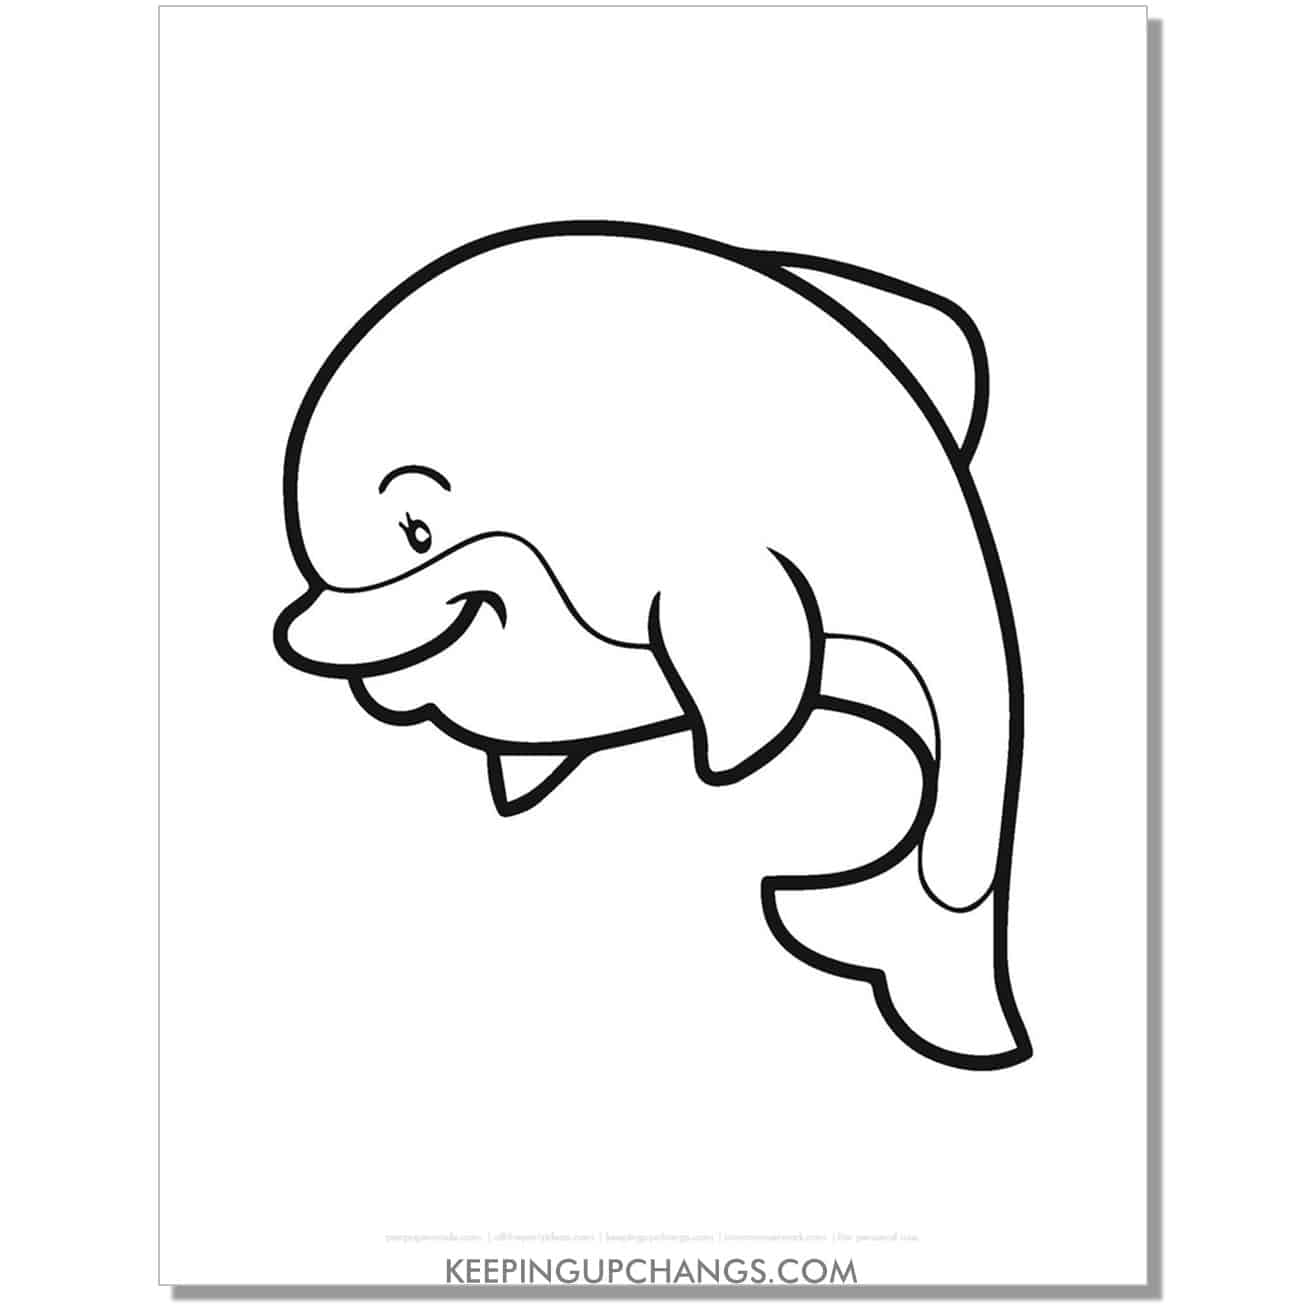 free dolphin with large head coloring page, sheet.